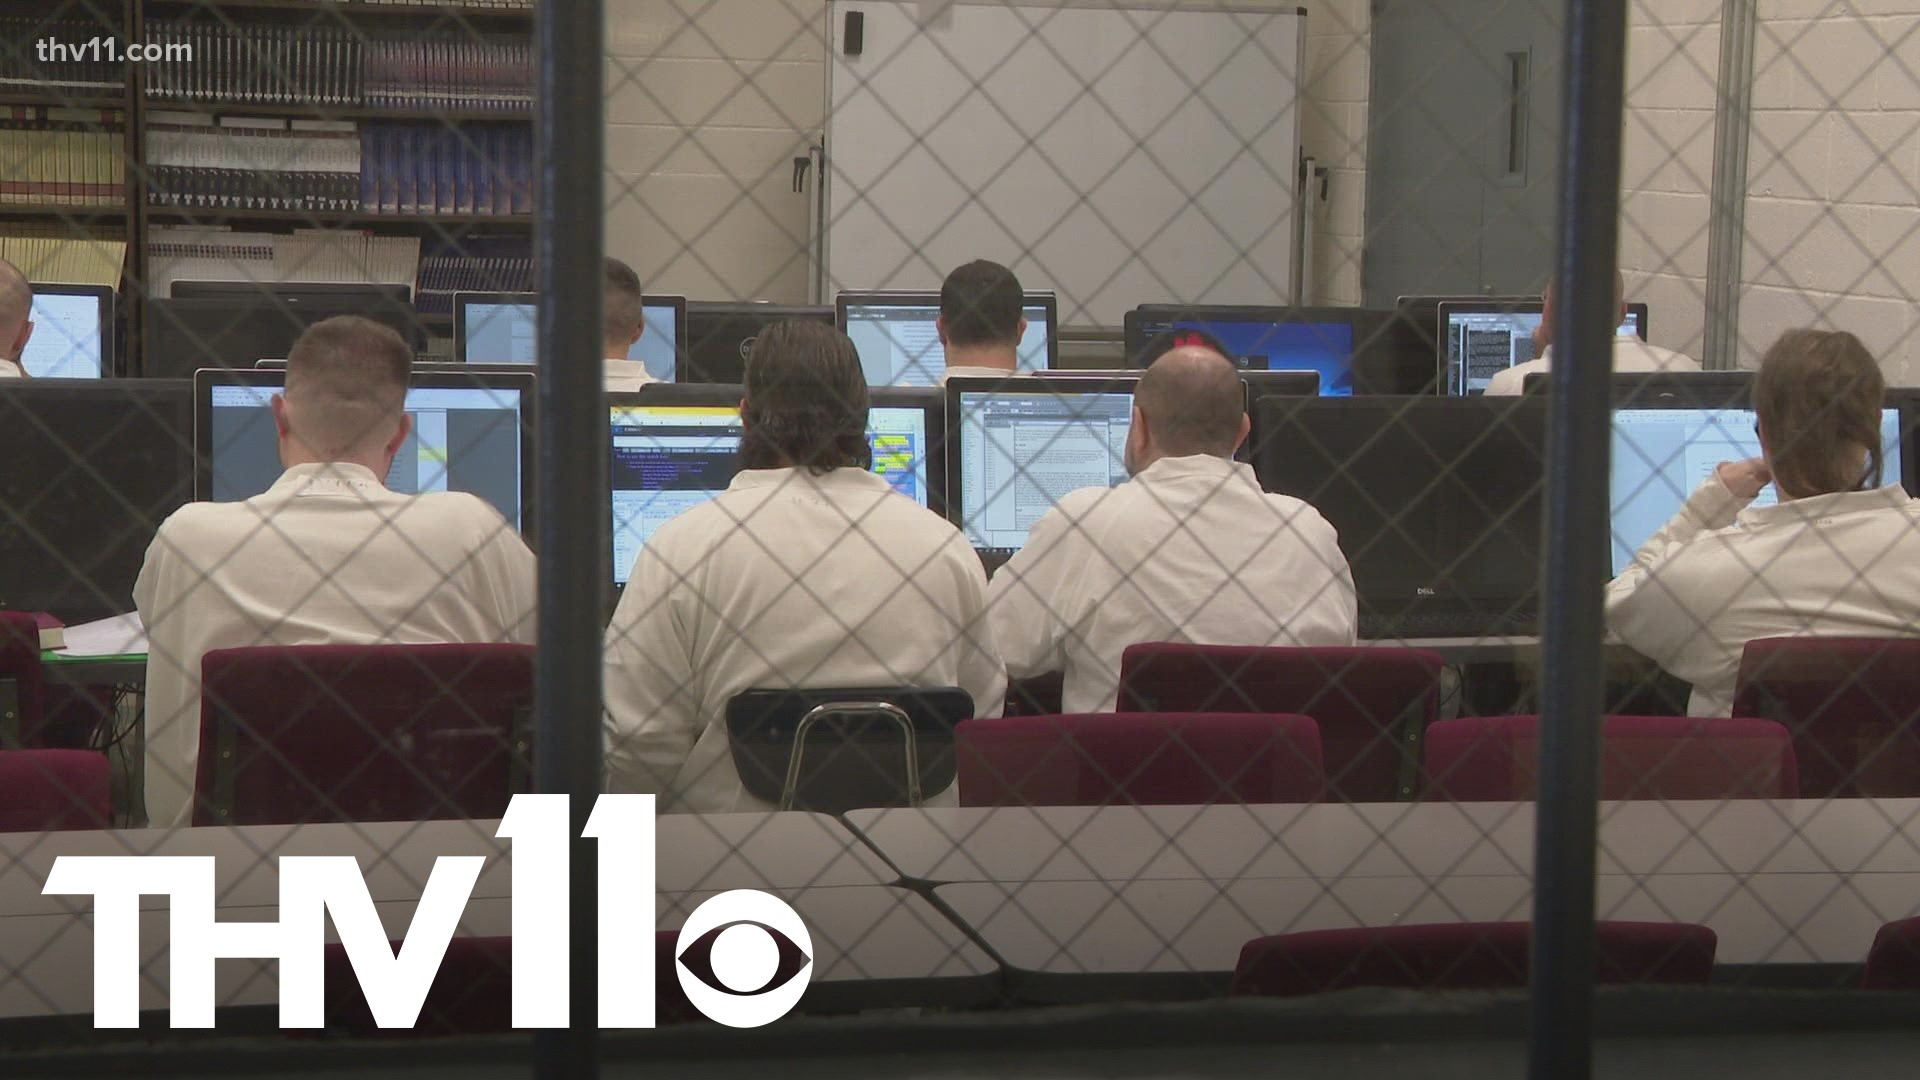 A new program by the Arkansas Department of Corrections is giving inmates a chance to make a difference while behind bars— by earning a college degree.